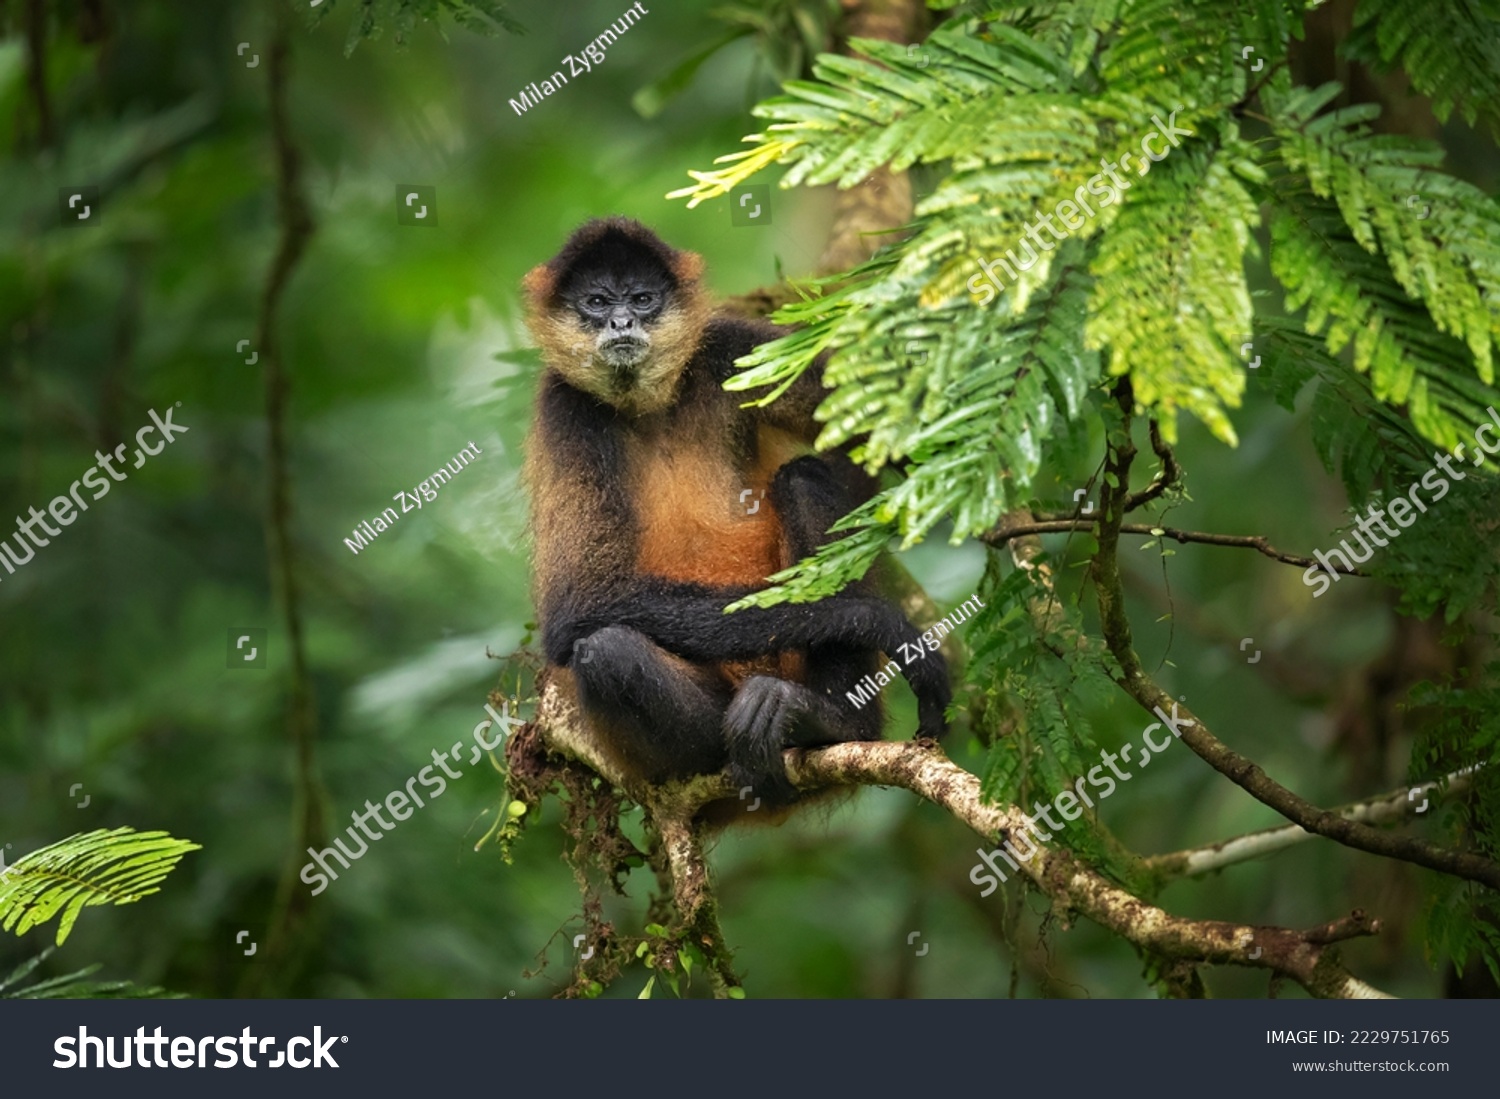 Geoffroy's spider monkey (Ateles geoffroyi), also known as the black-handed spider monkey or the Central American spider monkey #2229751765